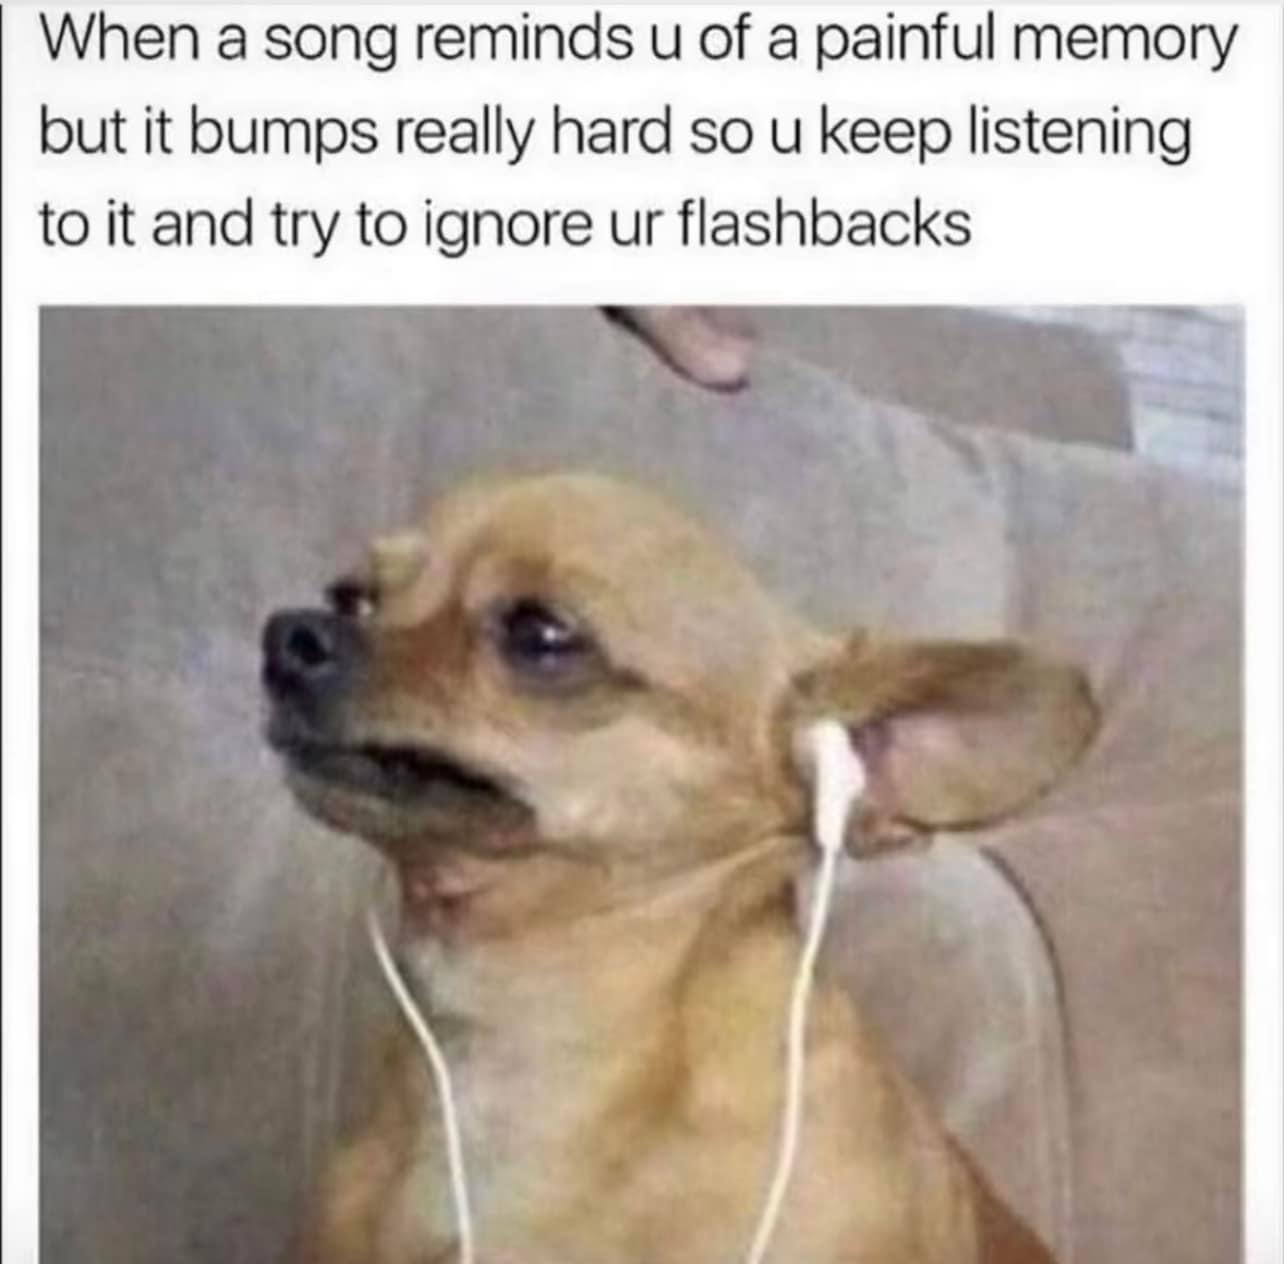 dank memes - dog - When a song reminds u of a painful memory but it bumps really hard so u keep listening to it and try to ignore ur flashbacks